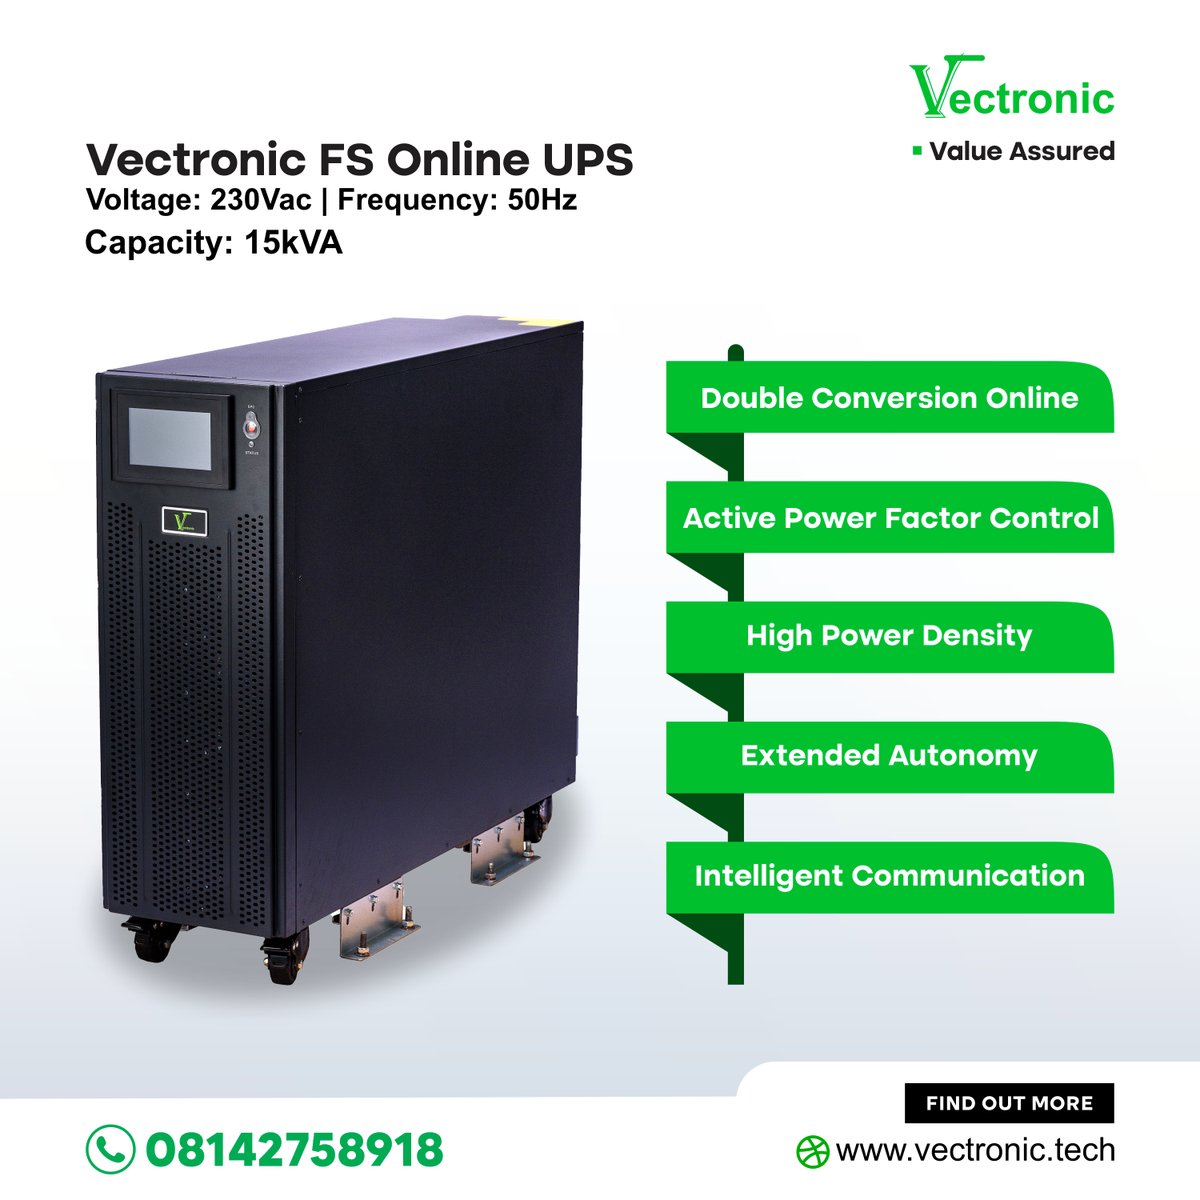 Stay Unplugged, Stay Unstoppable! ⚡

Call/Whatsapp: 08142758918; 08142758920 

#Vectronic #protection #powersolutions #PowerBackup #ups #equipment #elevator #construction #business #broadcasting #industrial #medical #medicalequipment #nigerians #lagos